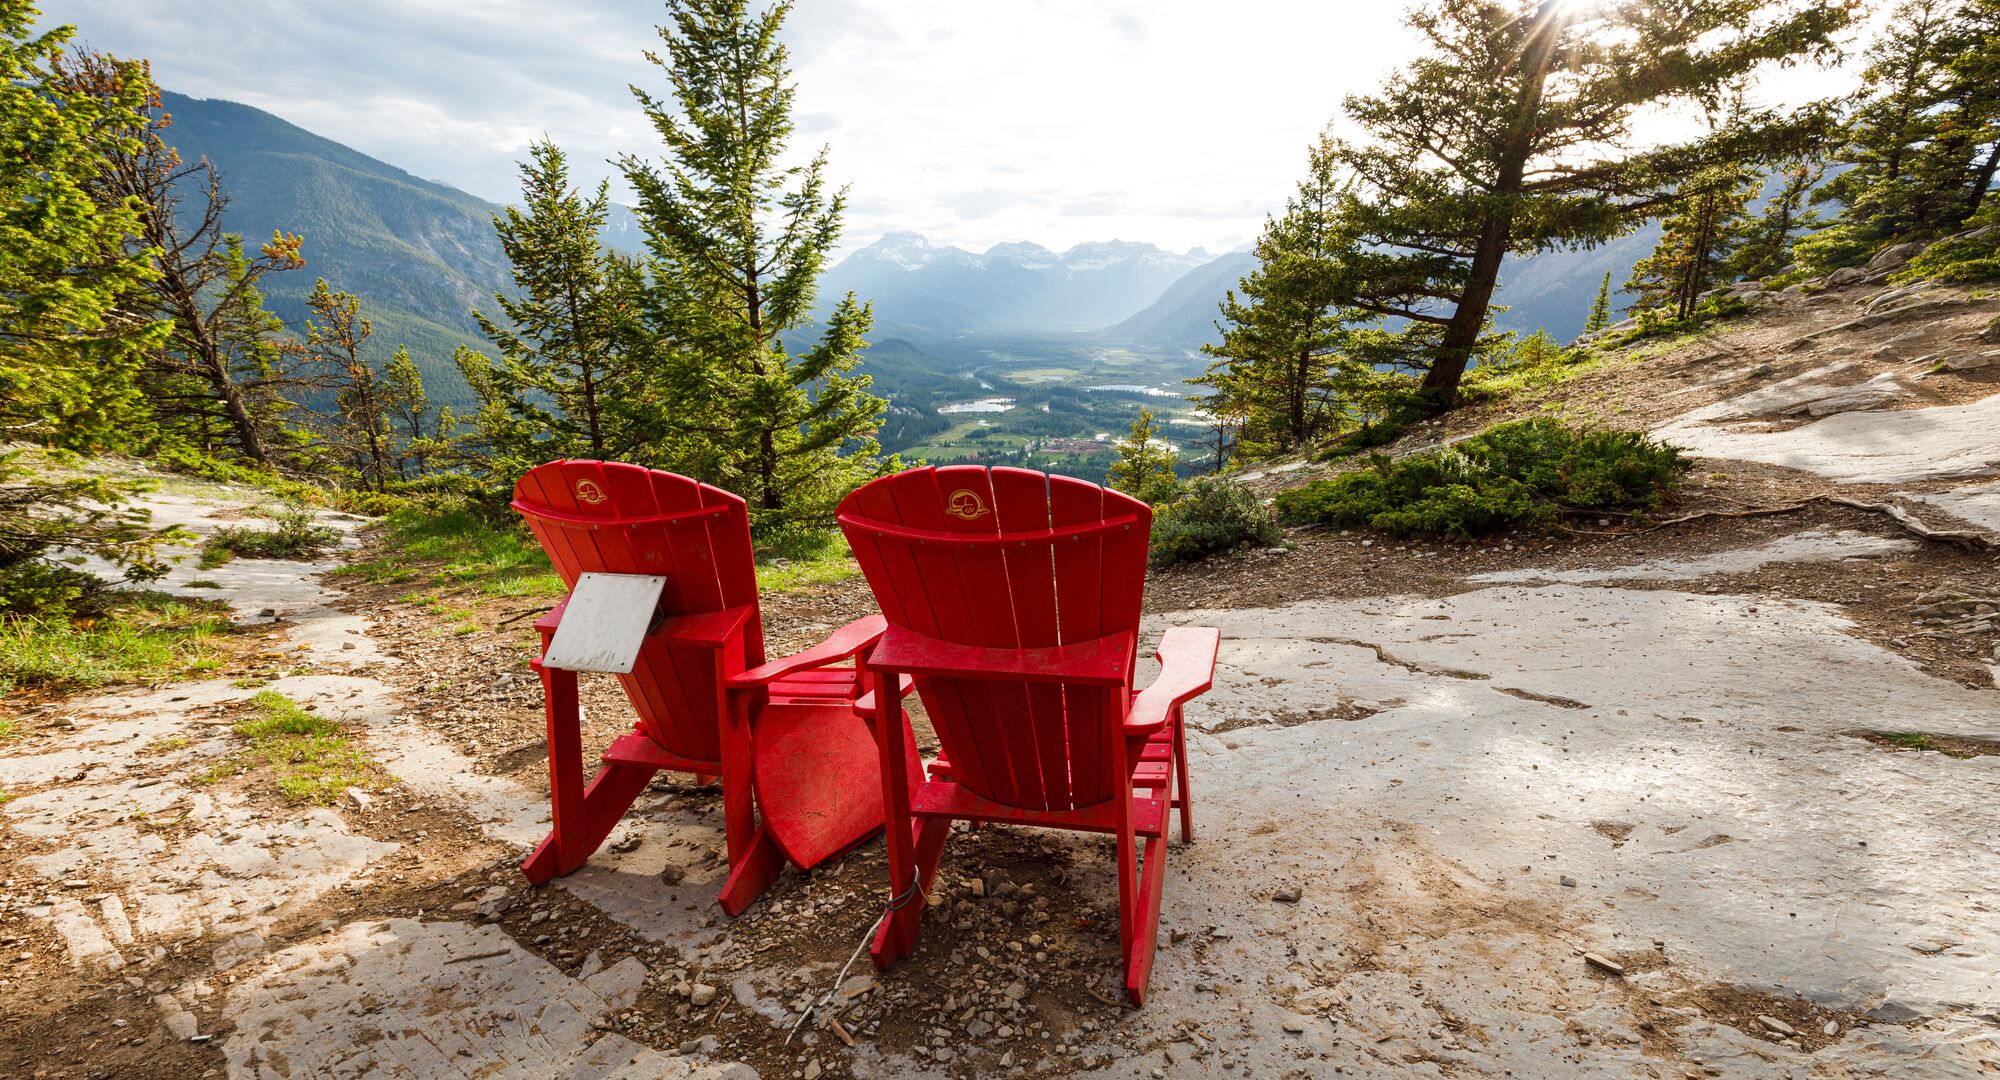 View of the red chairs at the Tunnel Mountain summer in the summer